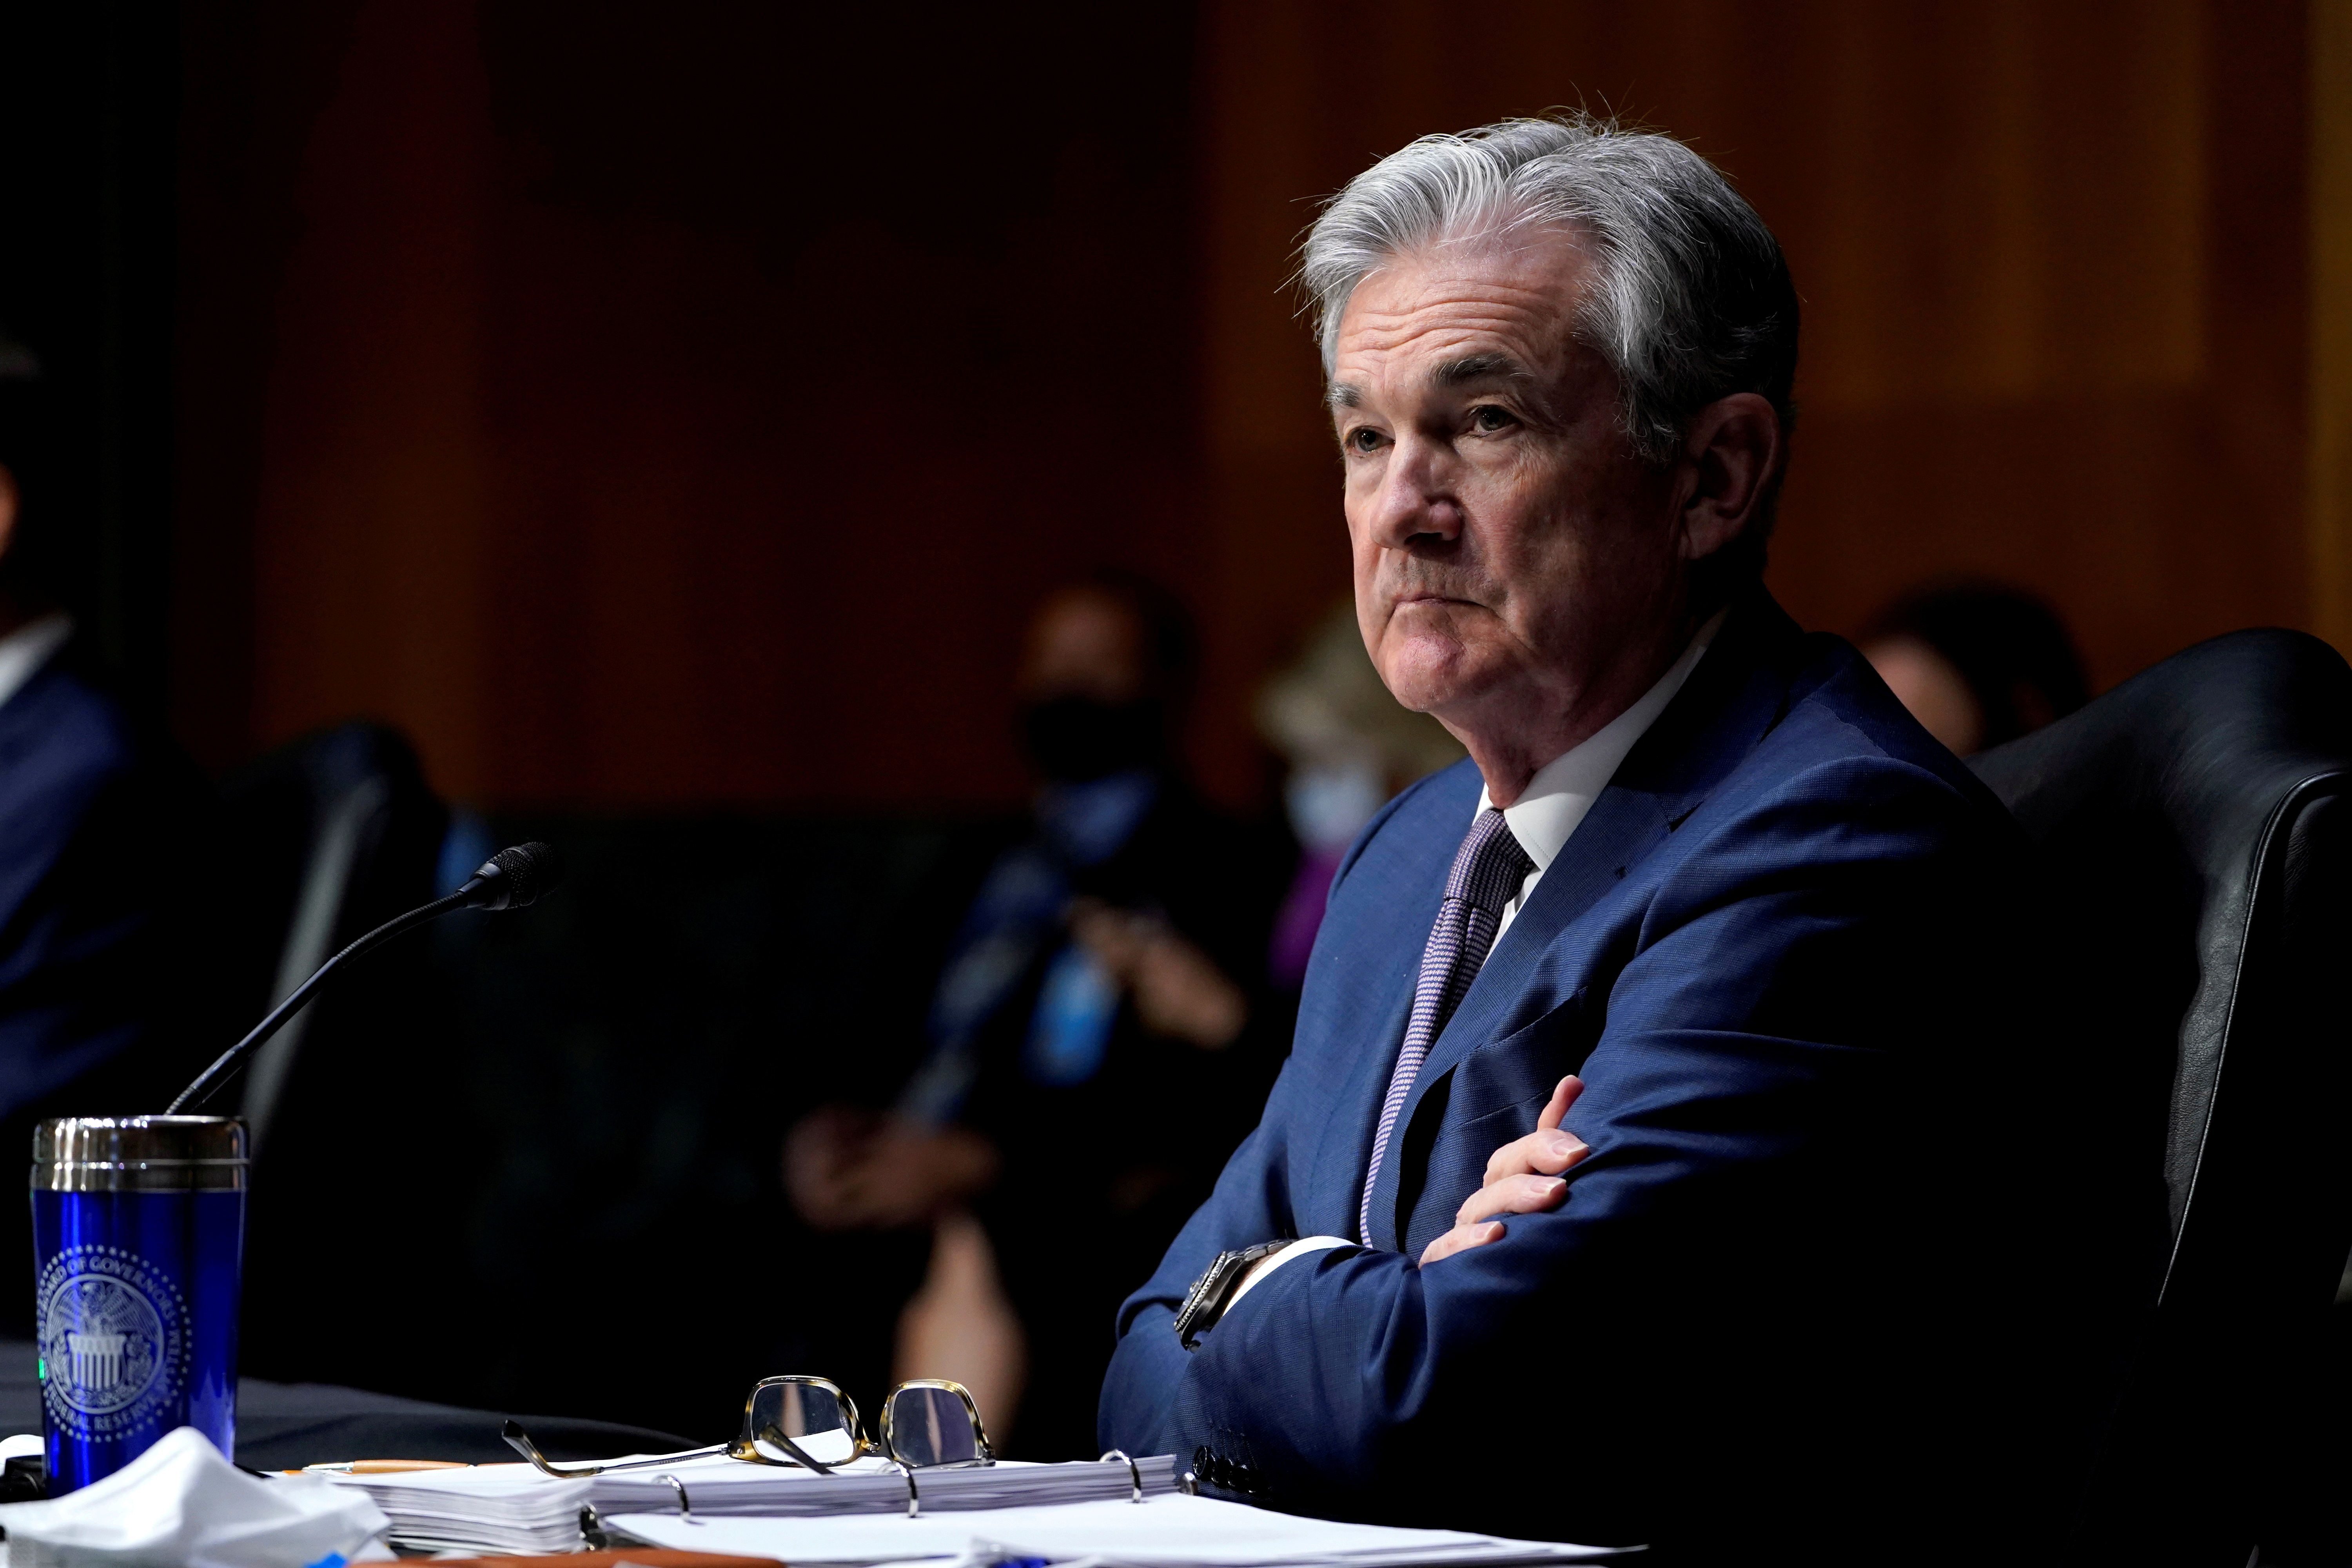 Chairman of the Federal Reserve Jerome Powell listens during a Senate Banking Committee hearing in Washington